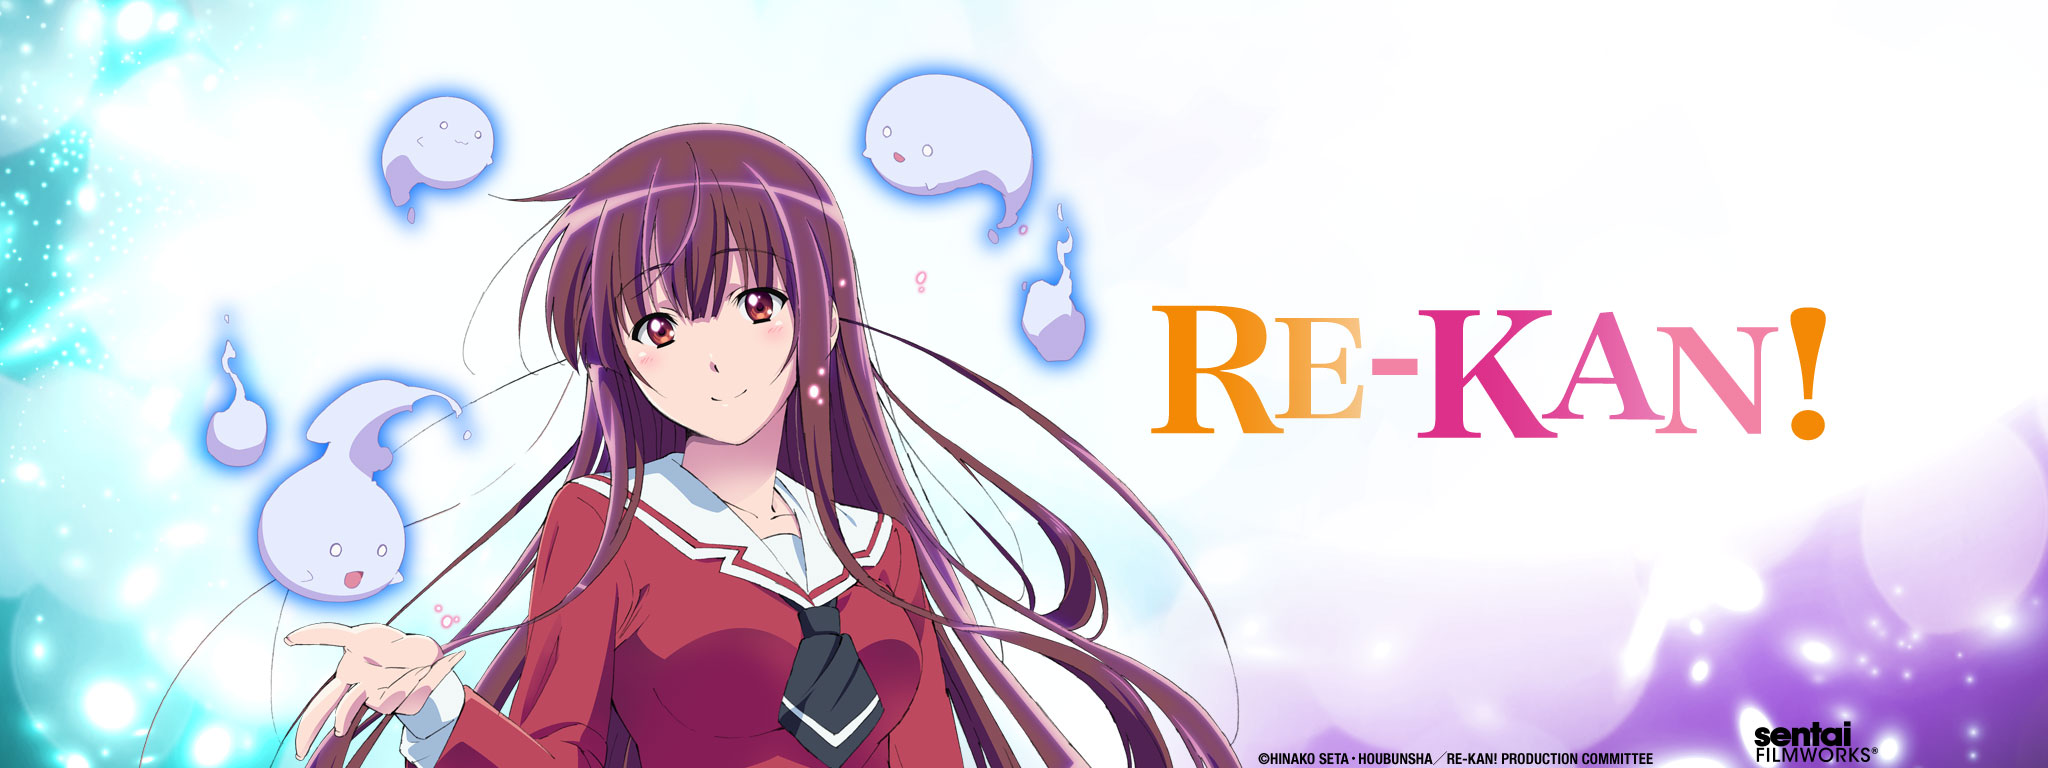 Title Art for RE-KAN!